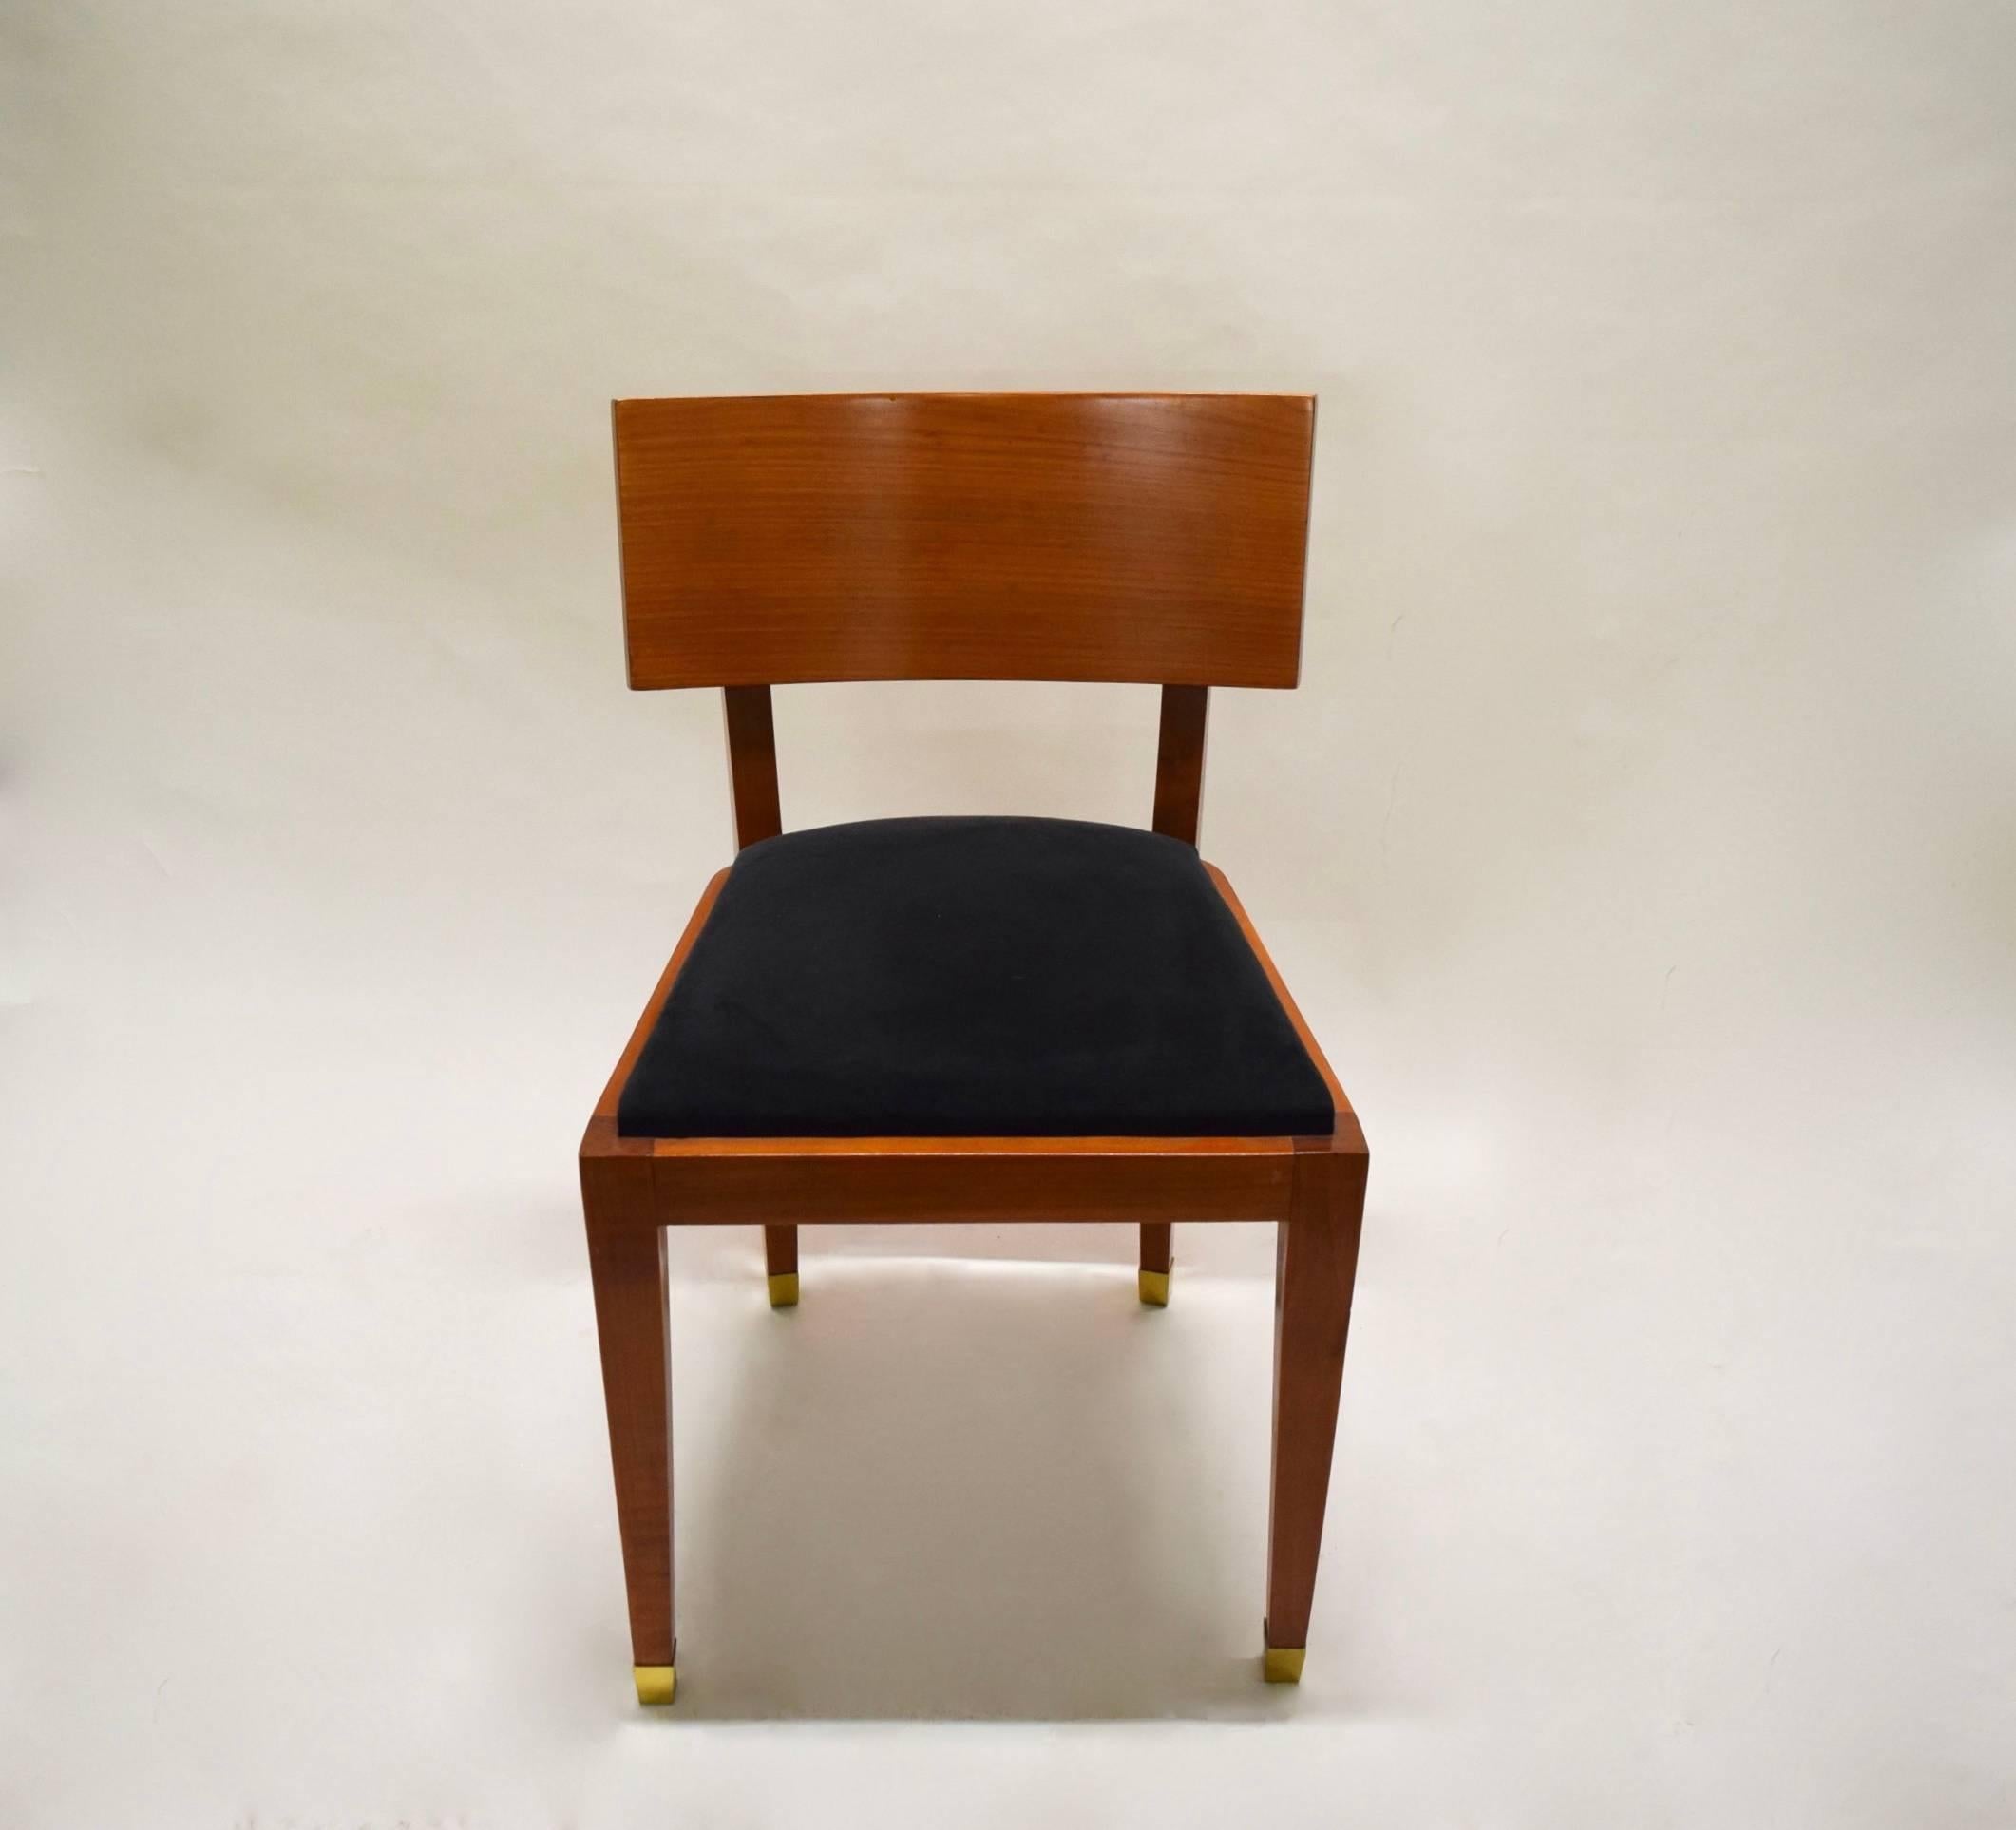 Four armless dining chairs in fruitwood with a curved backrest, tapered legs, solid brass sabots, and the seat cushion upholstered in black micro suede that was recovered in the early 2000s.
The dining table is also available.